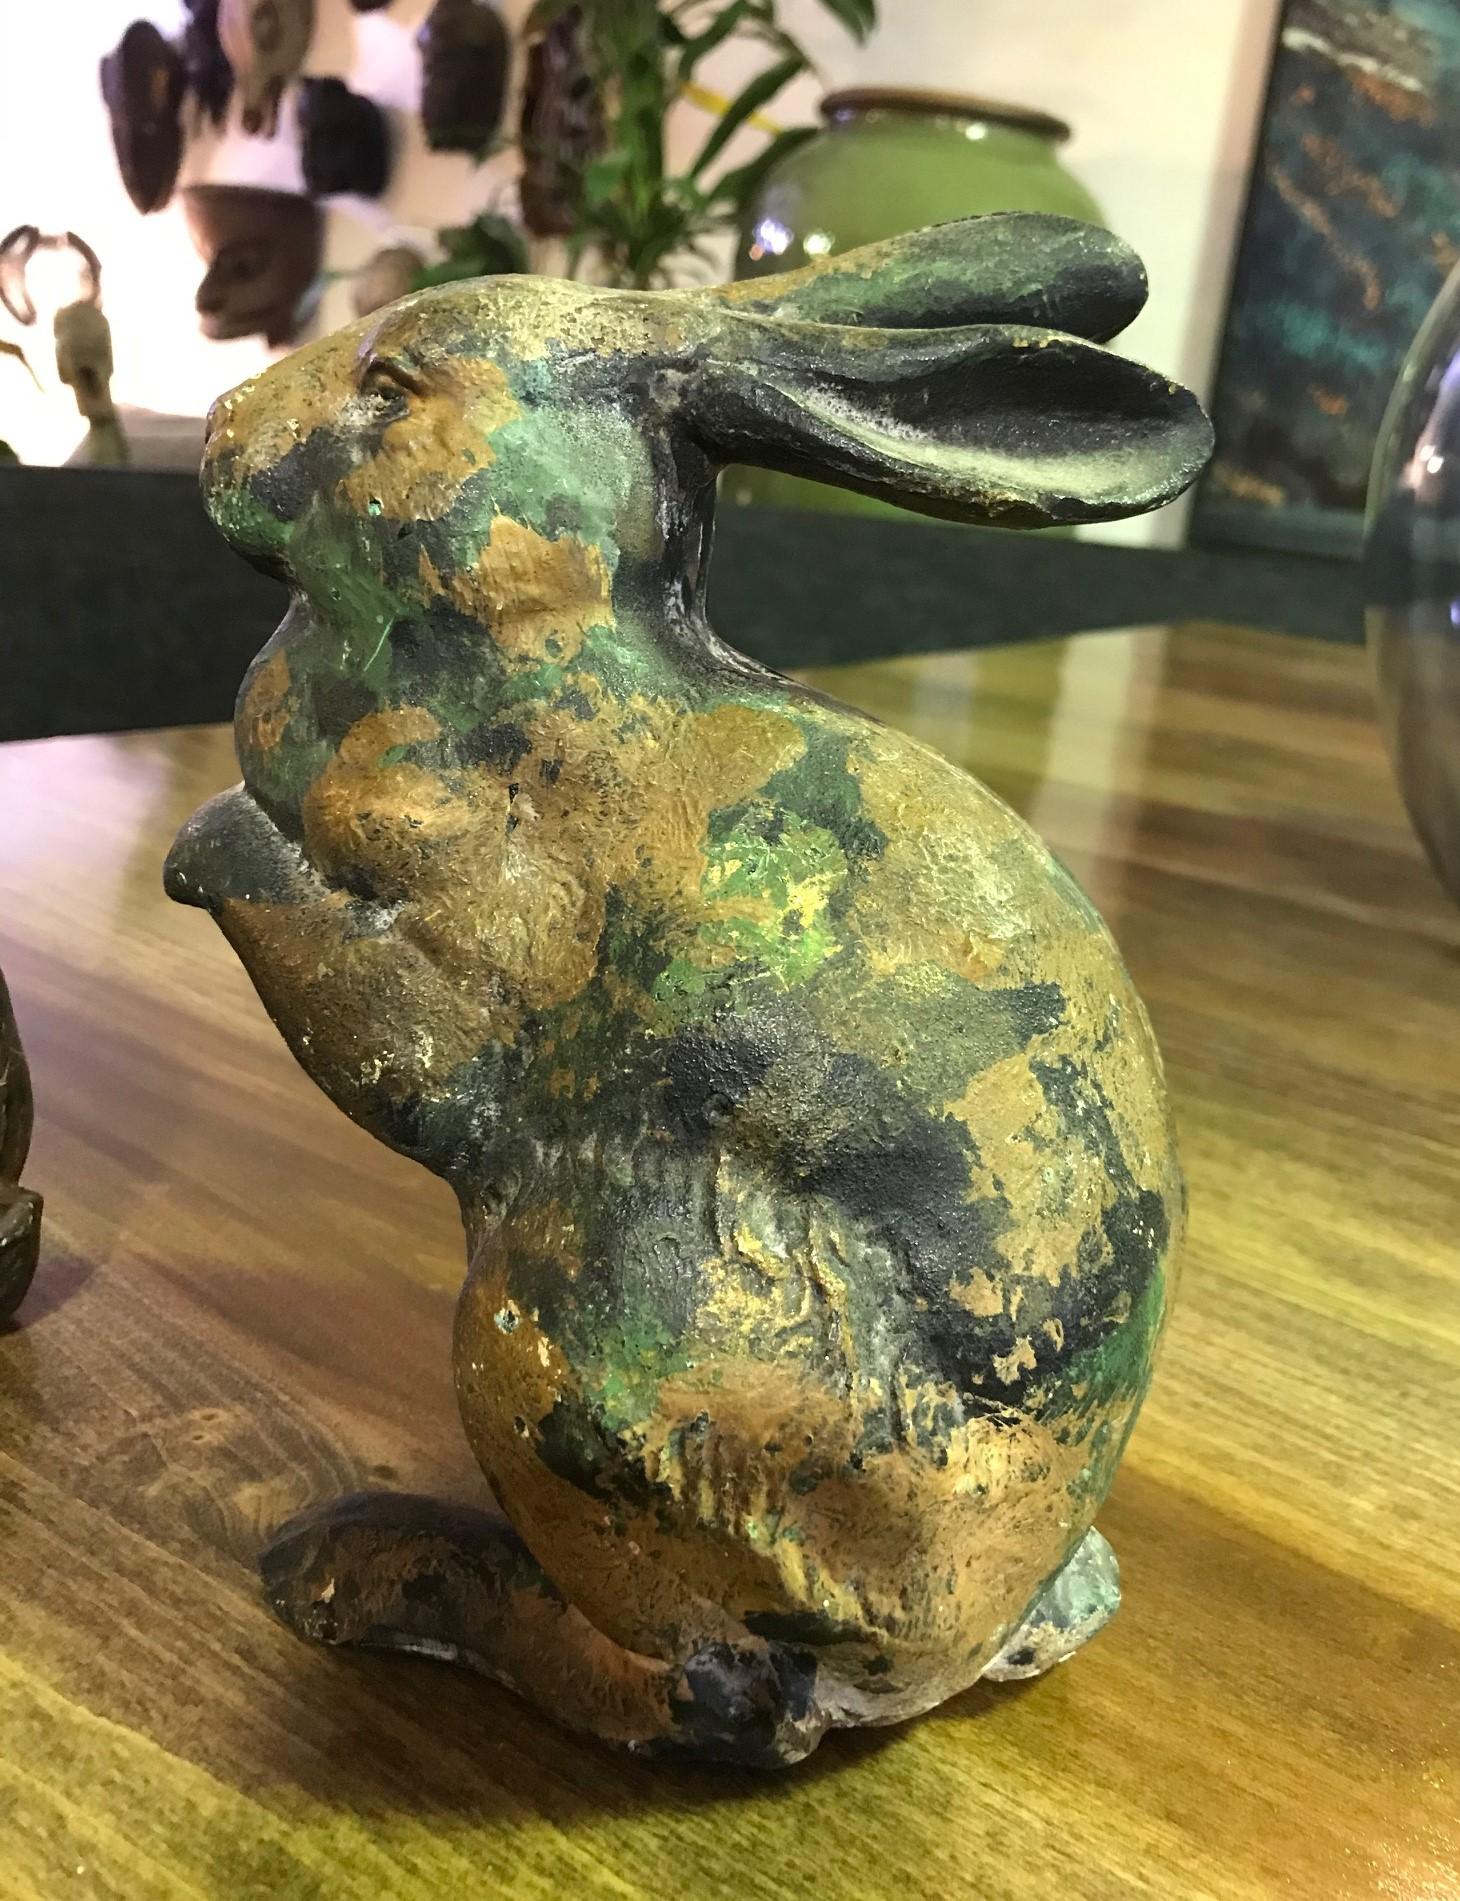 A fantastic pair of iron rabbits with a beautiful patina acquired with age.

Would be a great addition to any setting. 

Dimensions of the tallest piece: 9